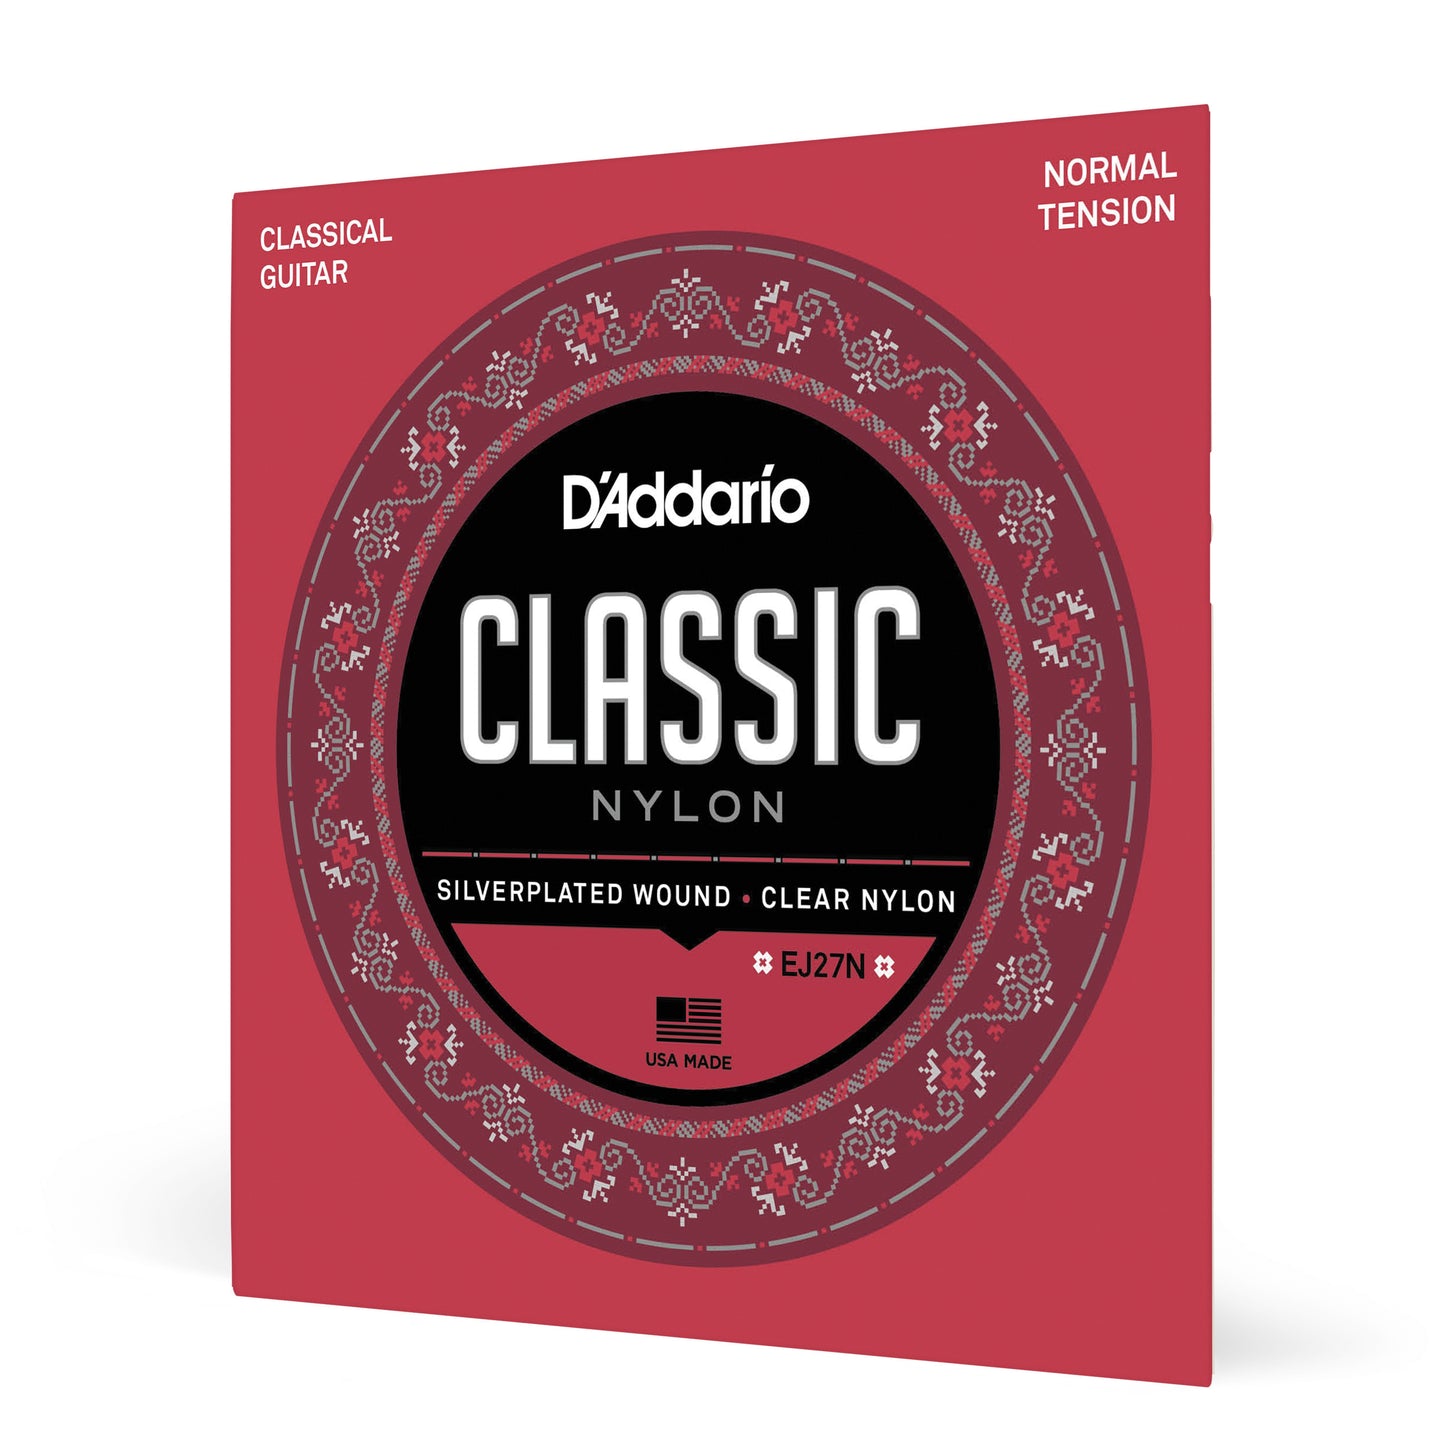 D'Addario Student Classical Nylon Strings (Normal Tension) 3 Pack